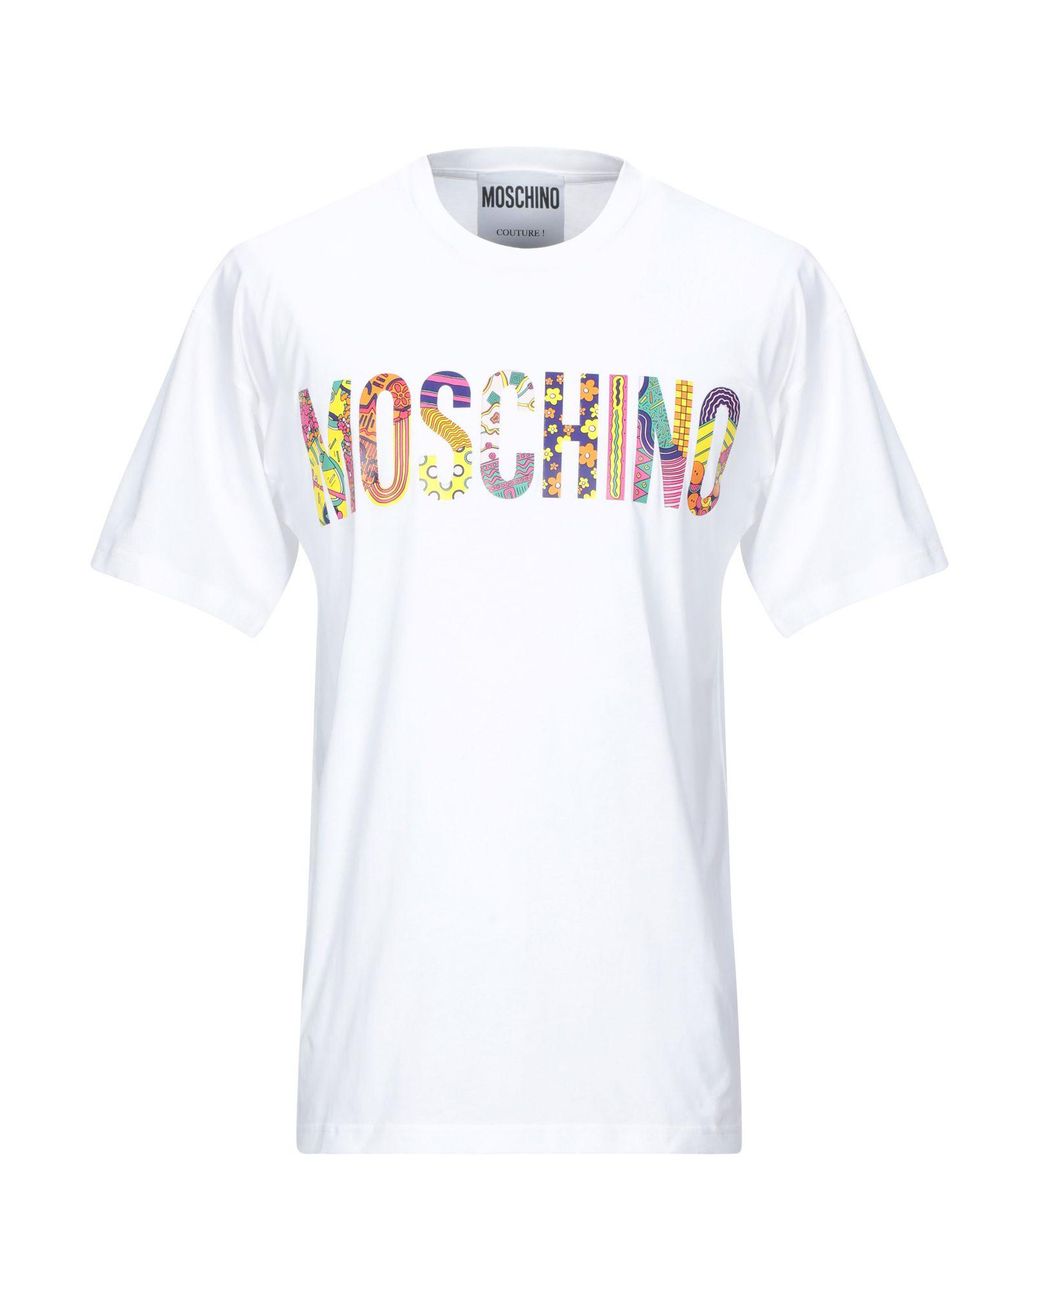 Moschino Cotton T-shirt in White for Men - Lyst